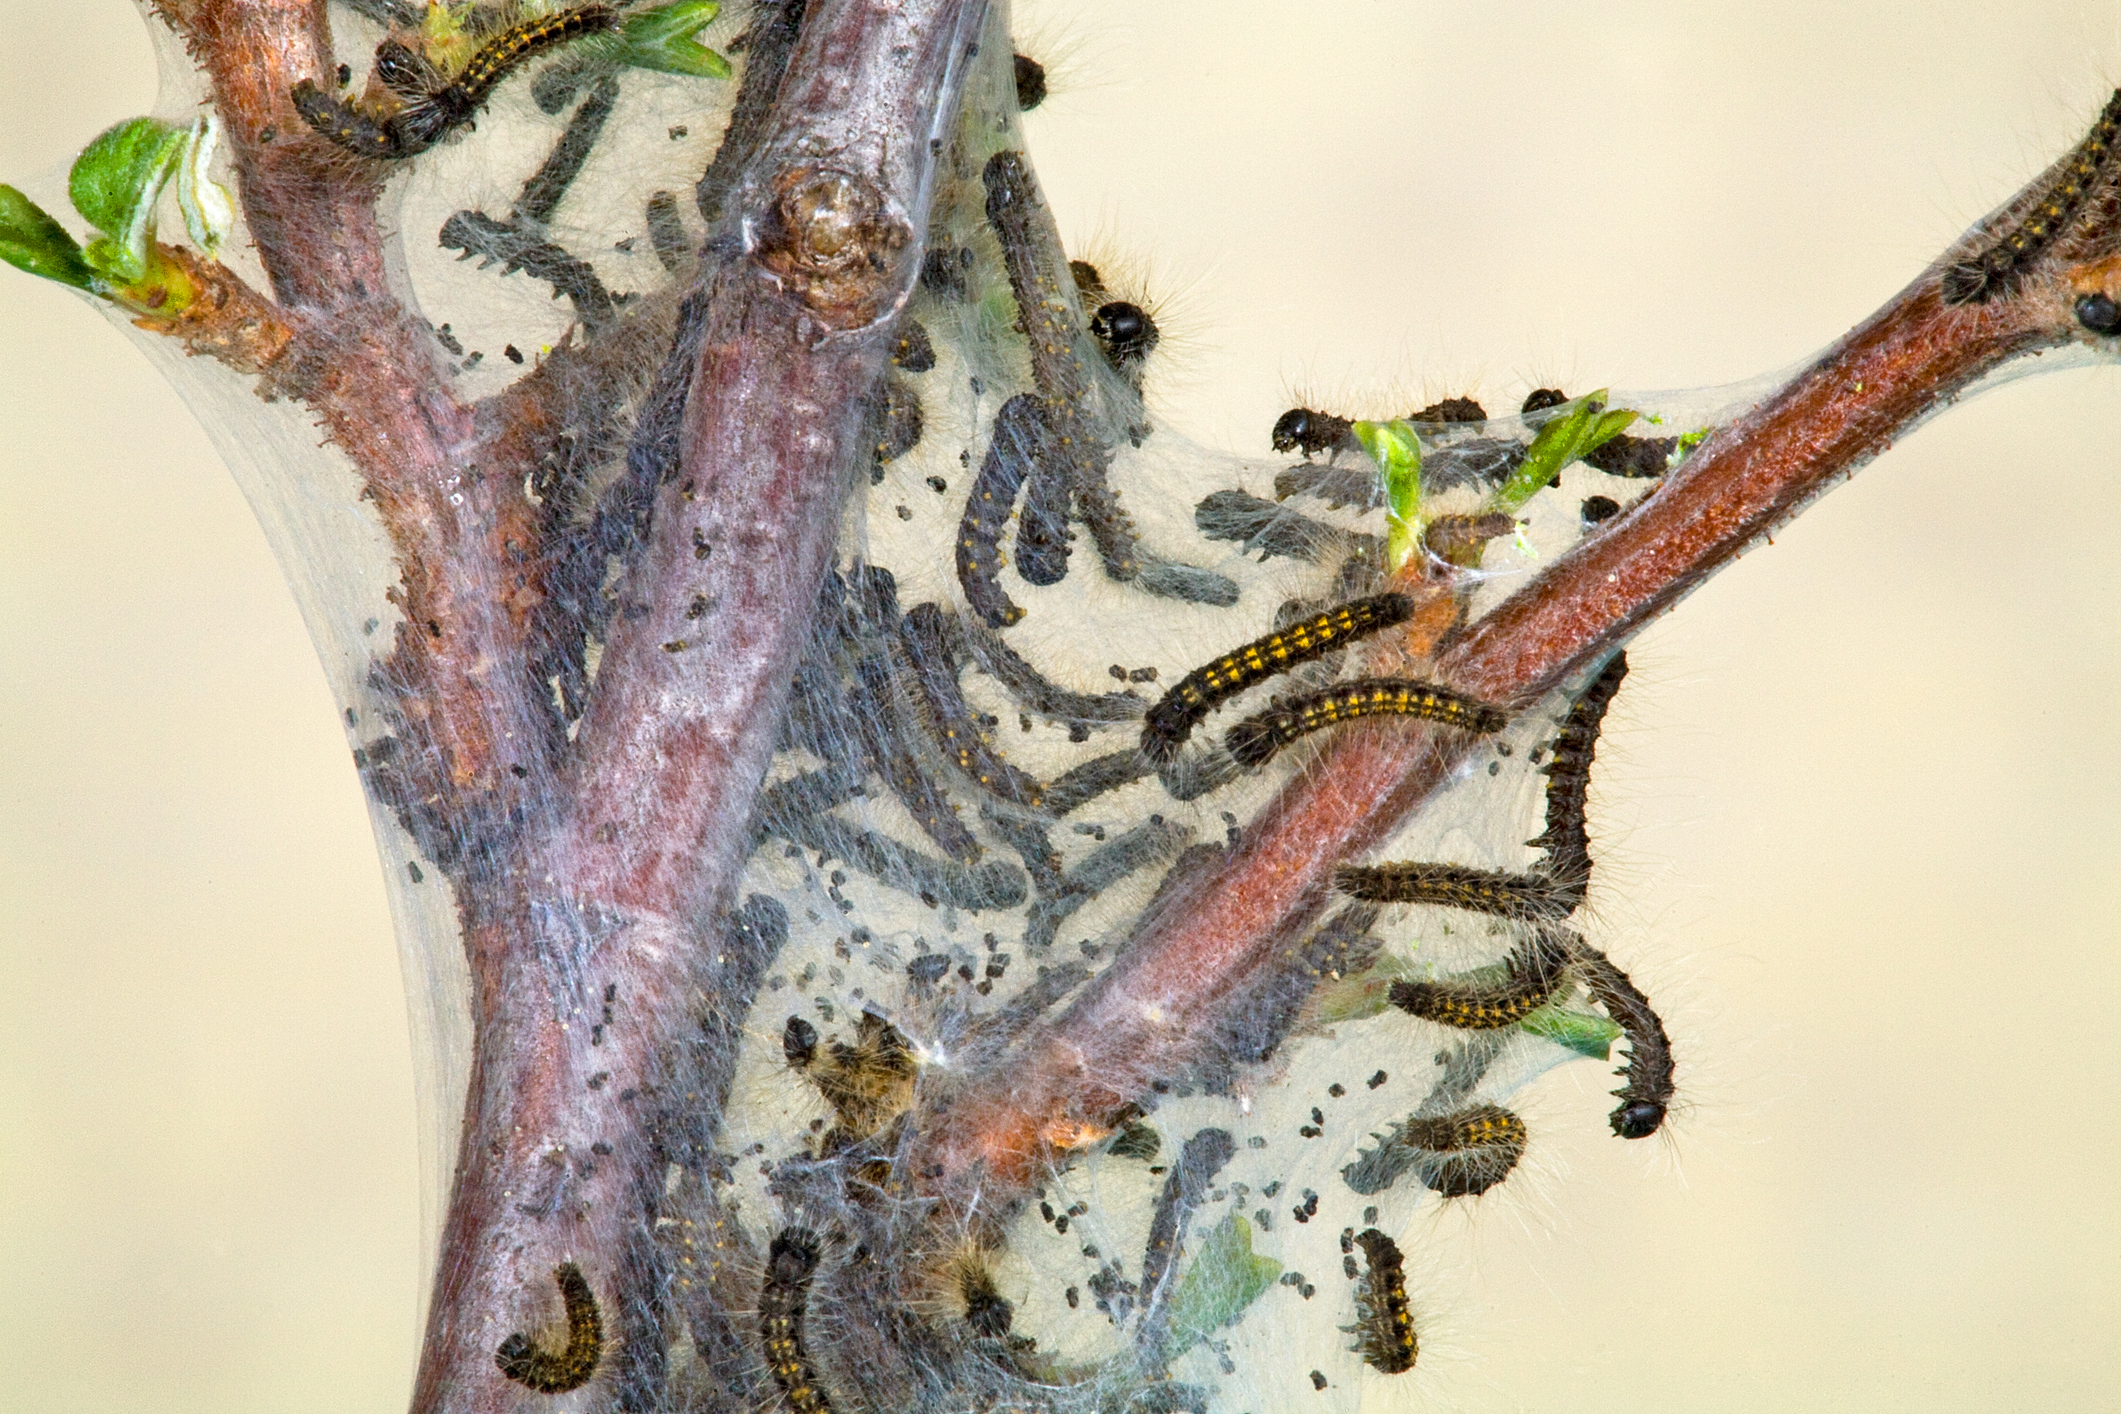 A cluster of tent caterpillars on a tree